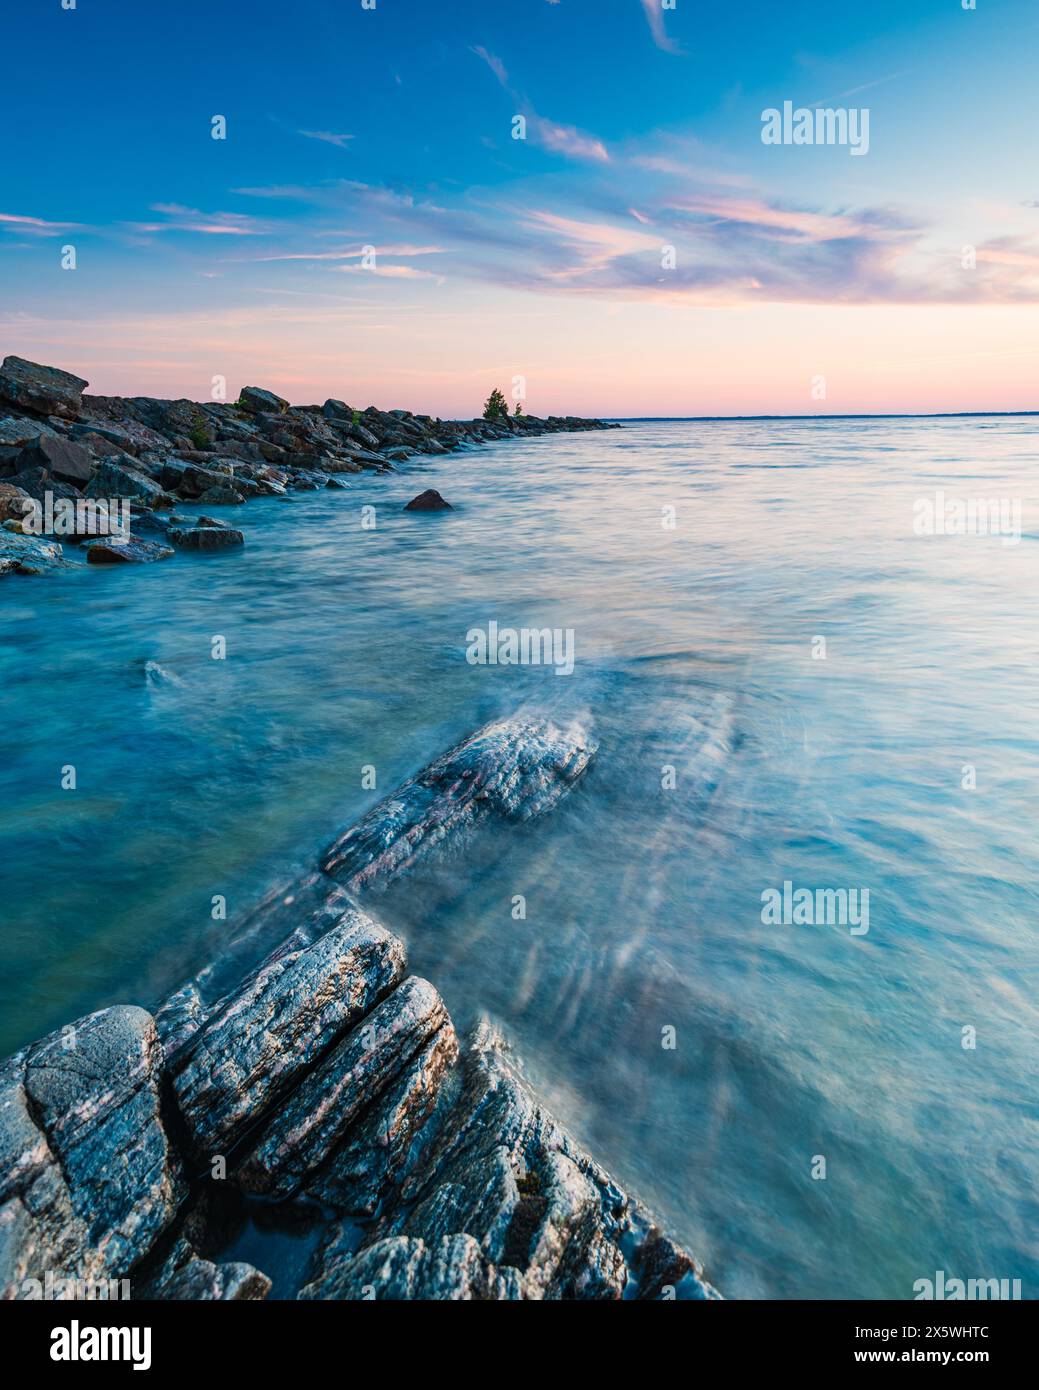 A body of water, Lake Vänern, is seen at sunset, bordered by a rocky shore. The calm waters meet the rugged rocks in a picturesque scene. Stock Photo